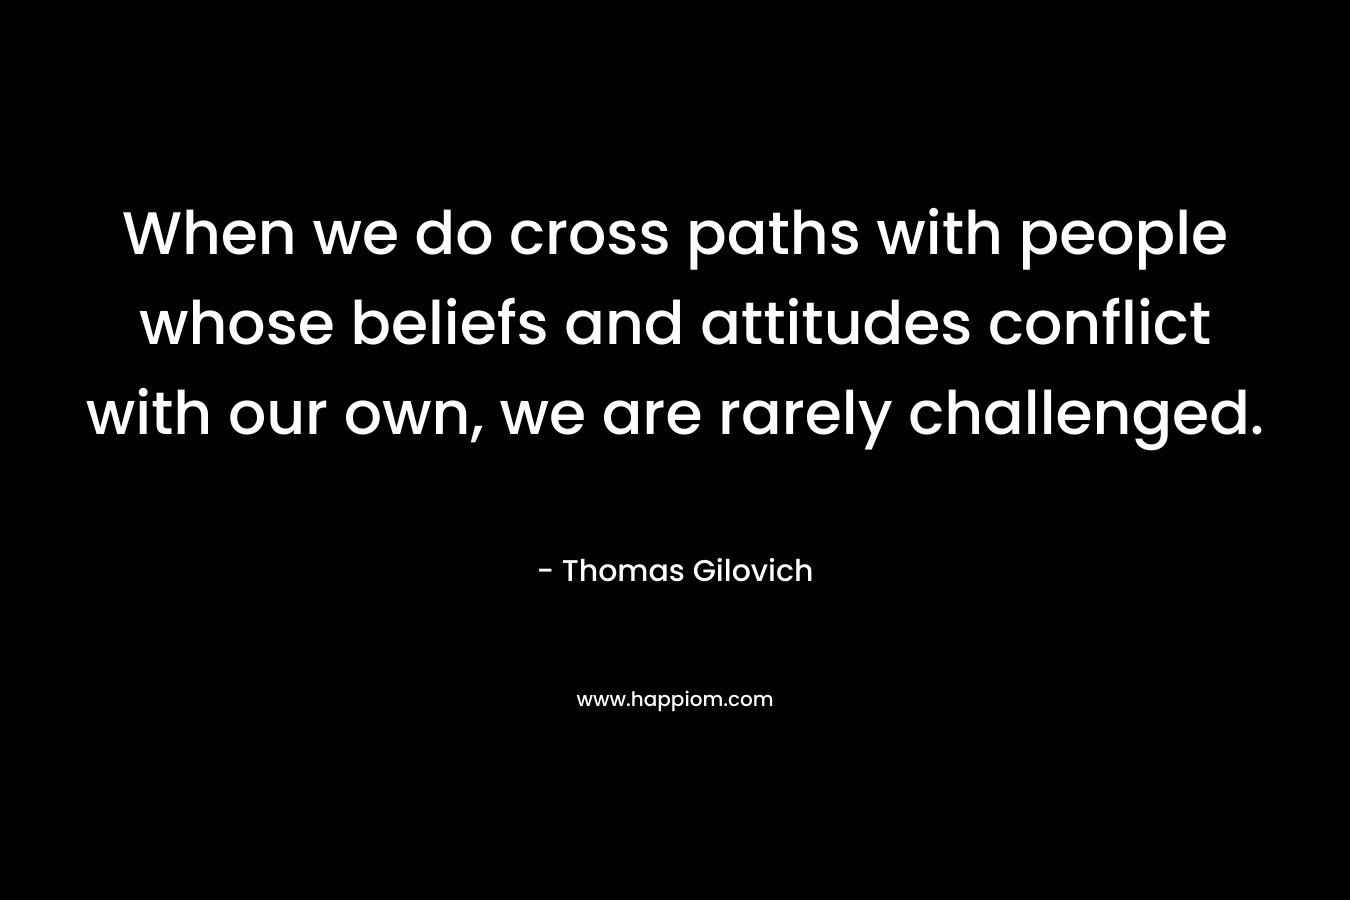 When we do cross paths with people whose beliefs and attitudes conflict with our own, we are rarely challenged.